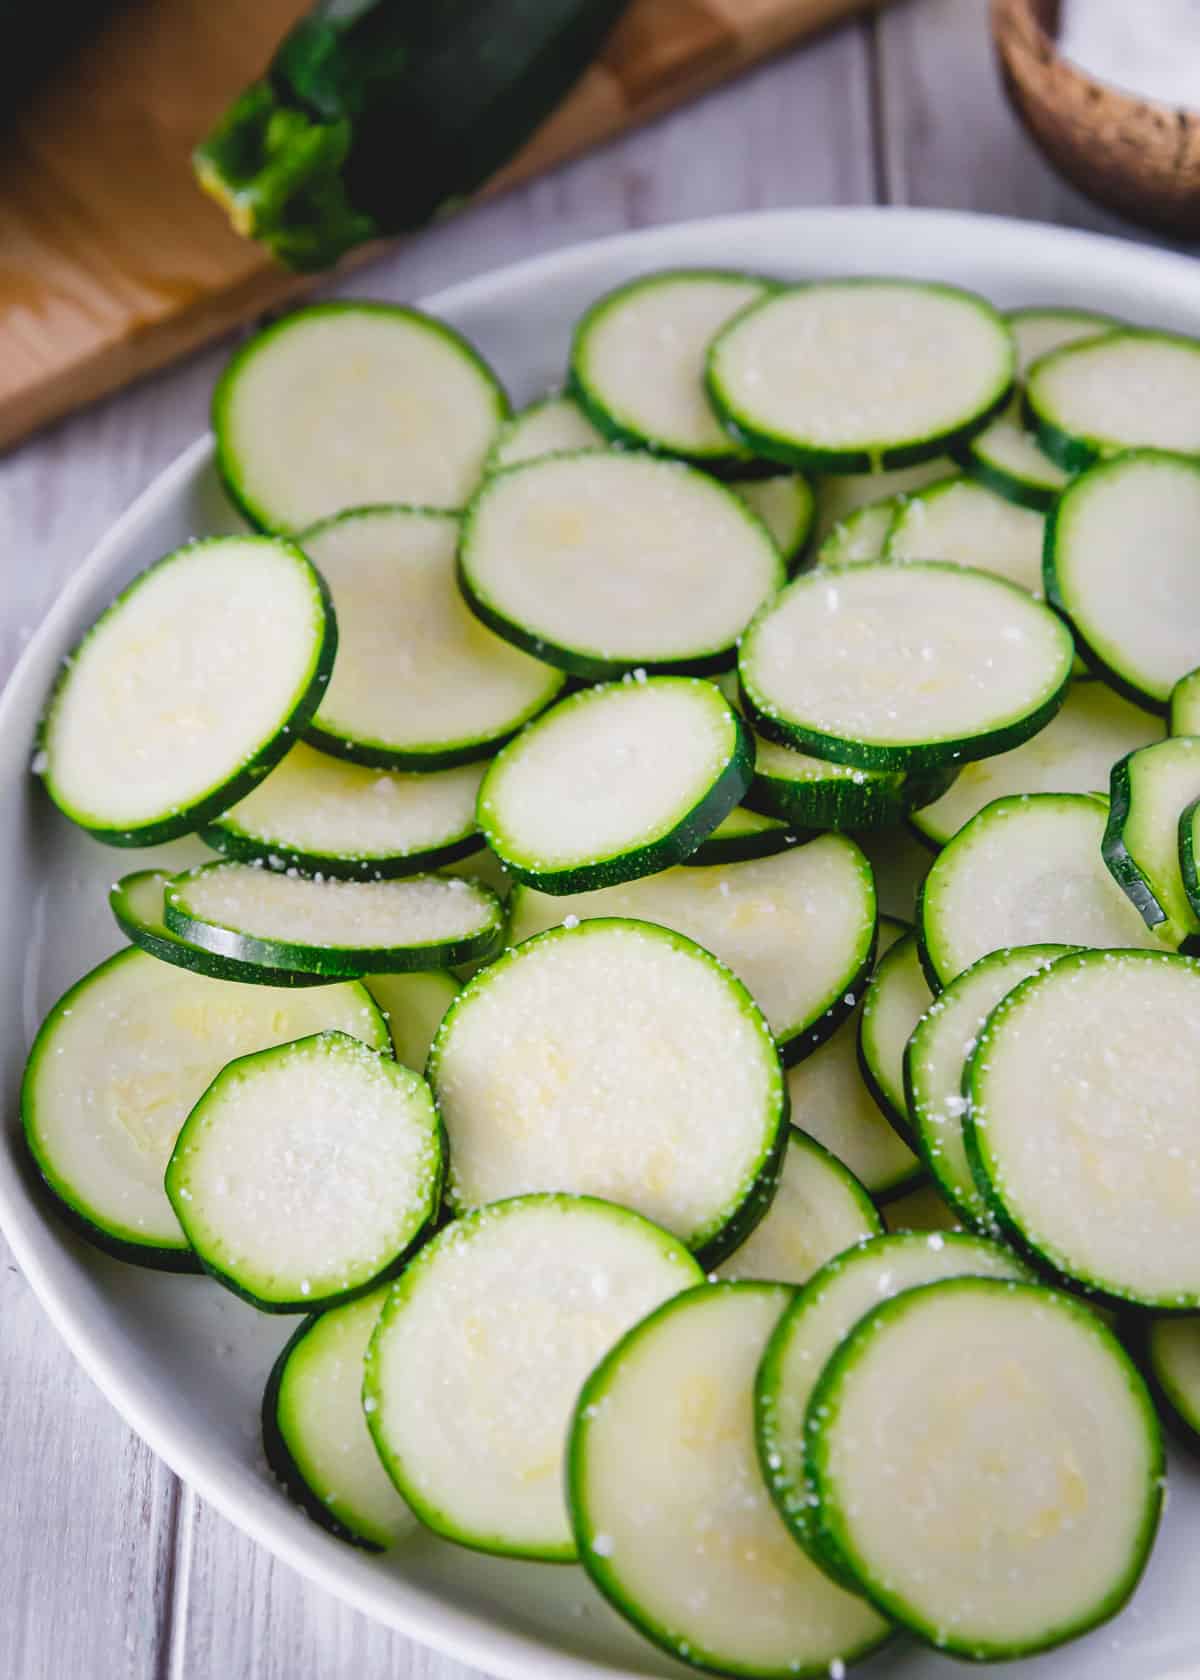 Salted zucchini slices to make air fried zucchini chips.